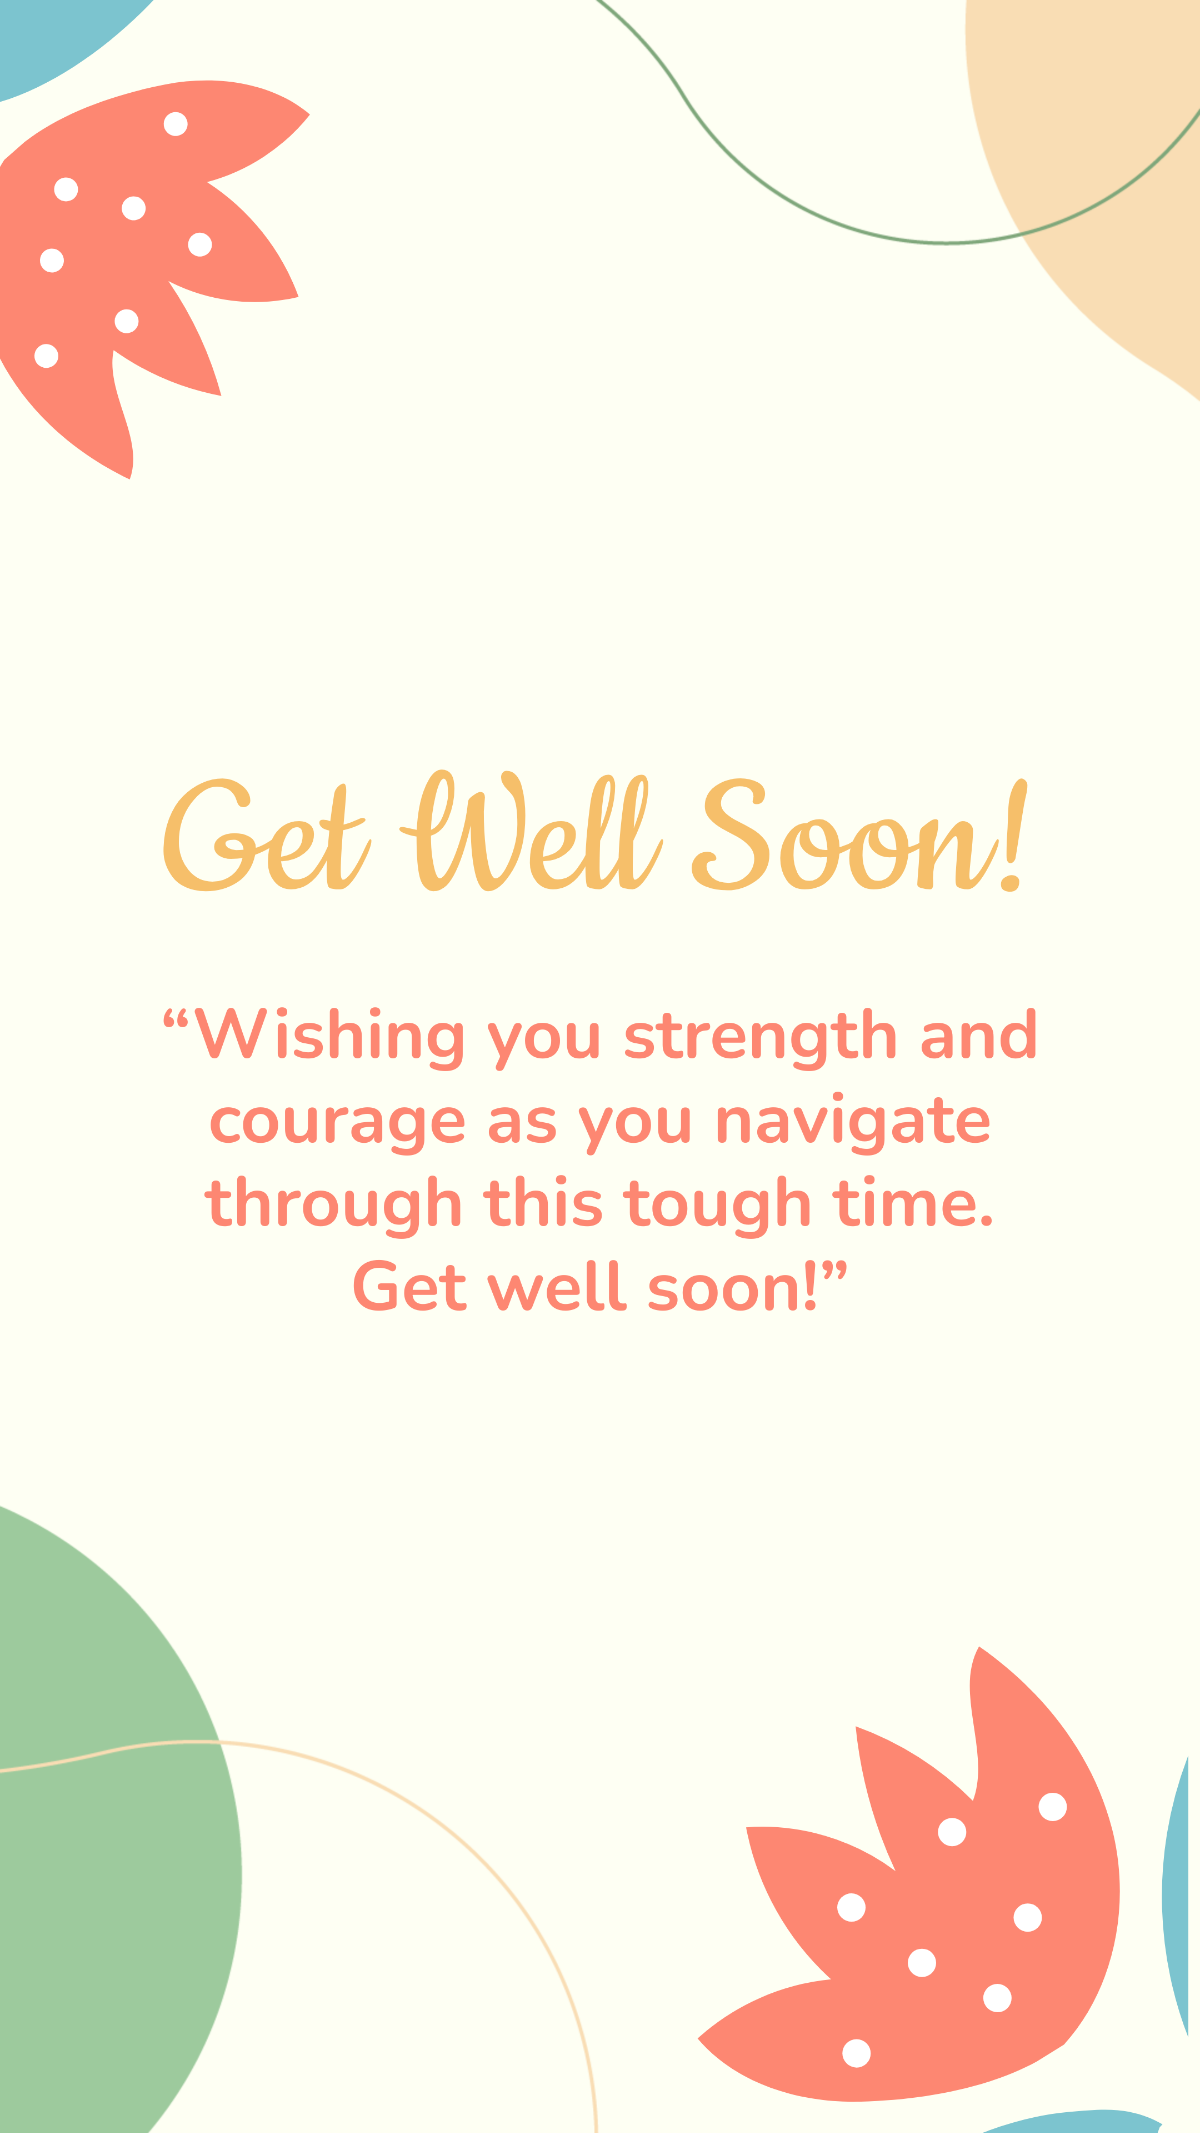 Get Well Soon Inspirational Quote